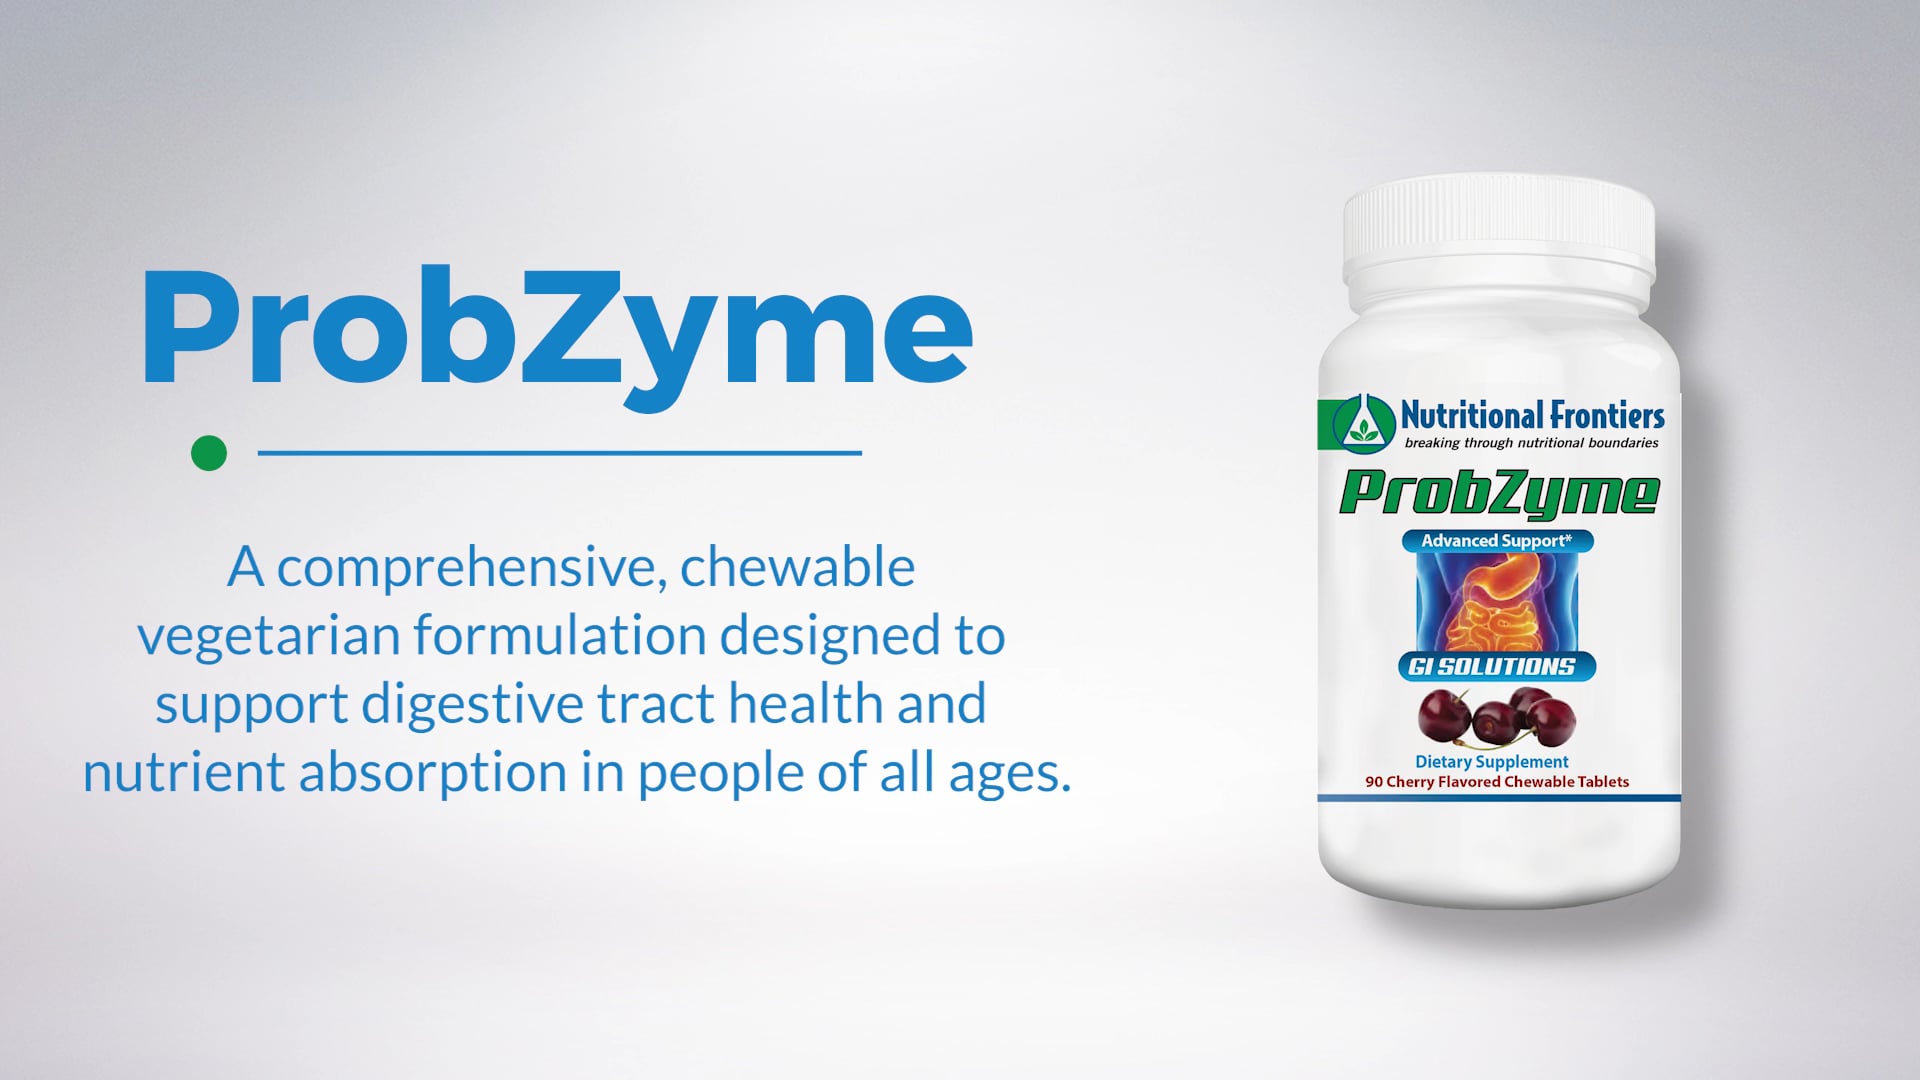 NF Product Overview - Probzyme